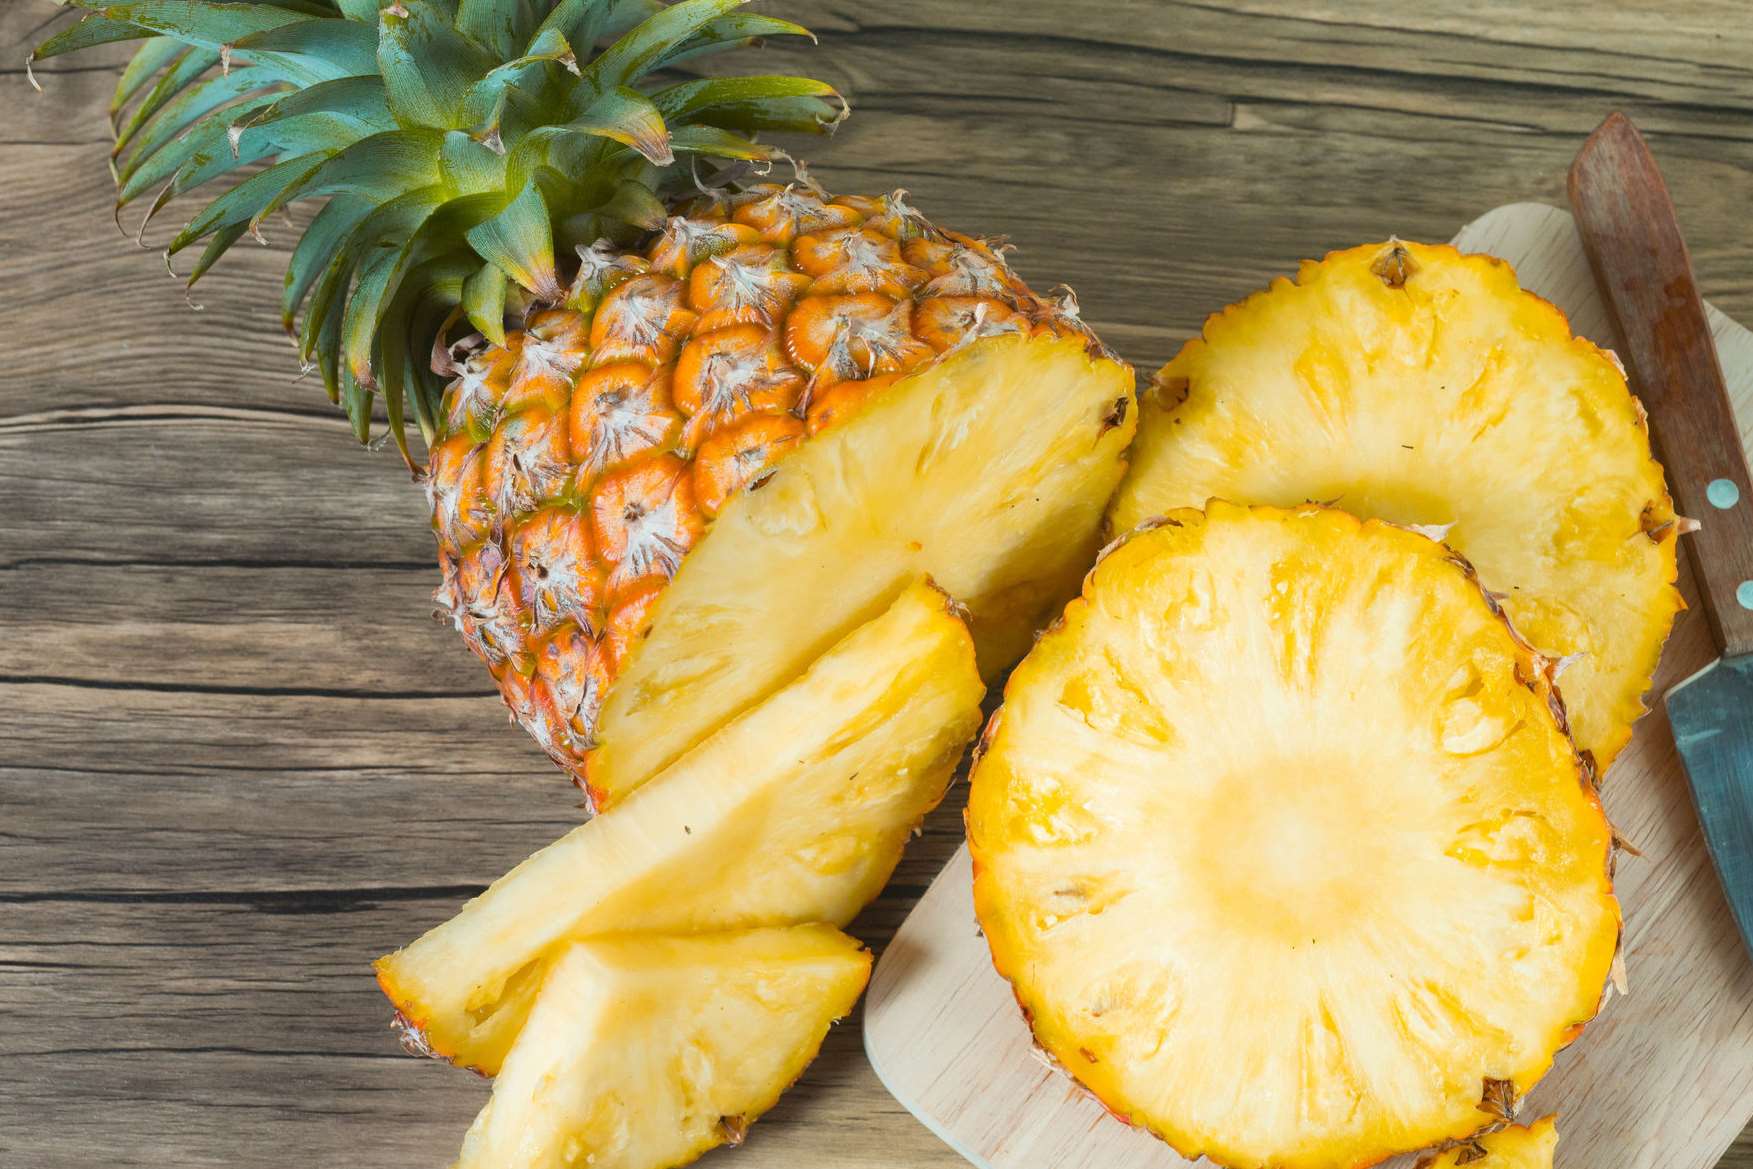 You'd need to eat 40 grapefruits in one sitting for the 'fat-burning' chemicals in pineapples to have any real impact